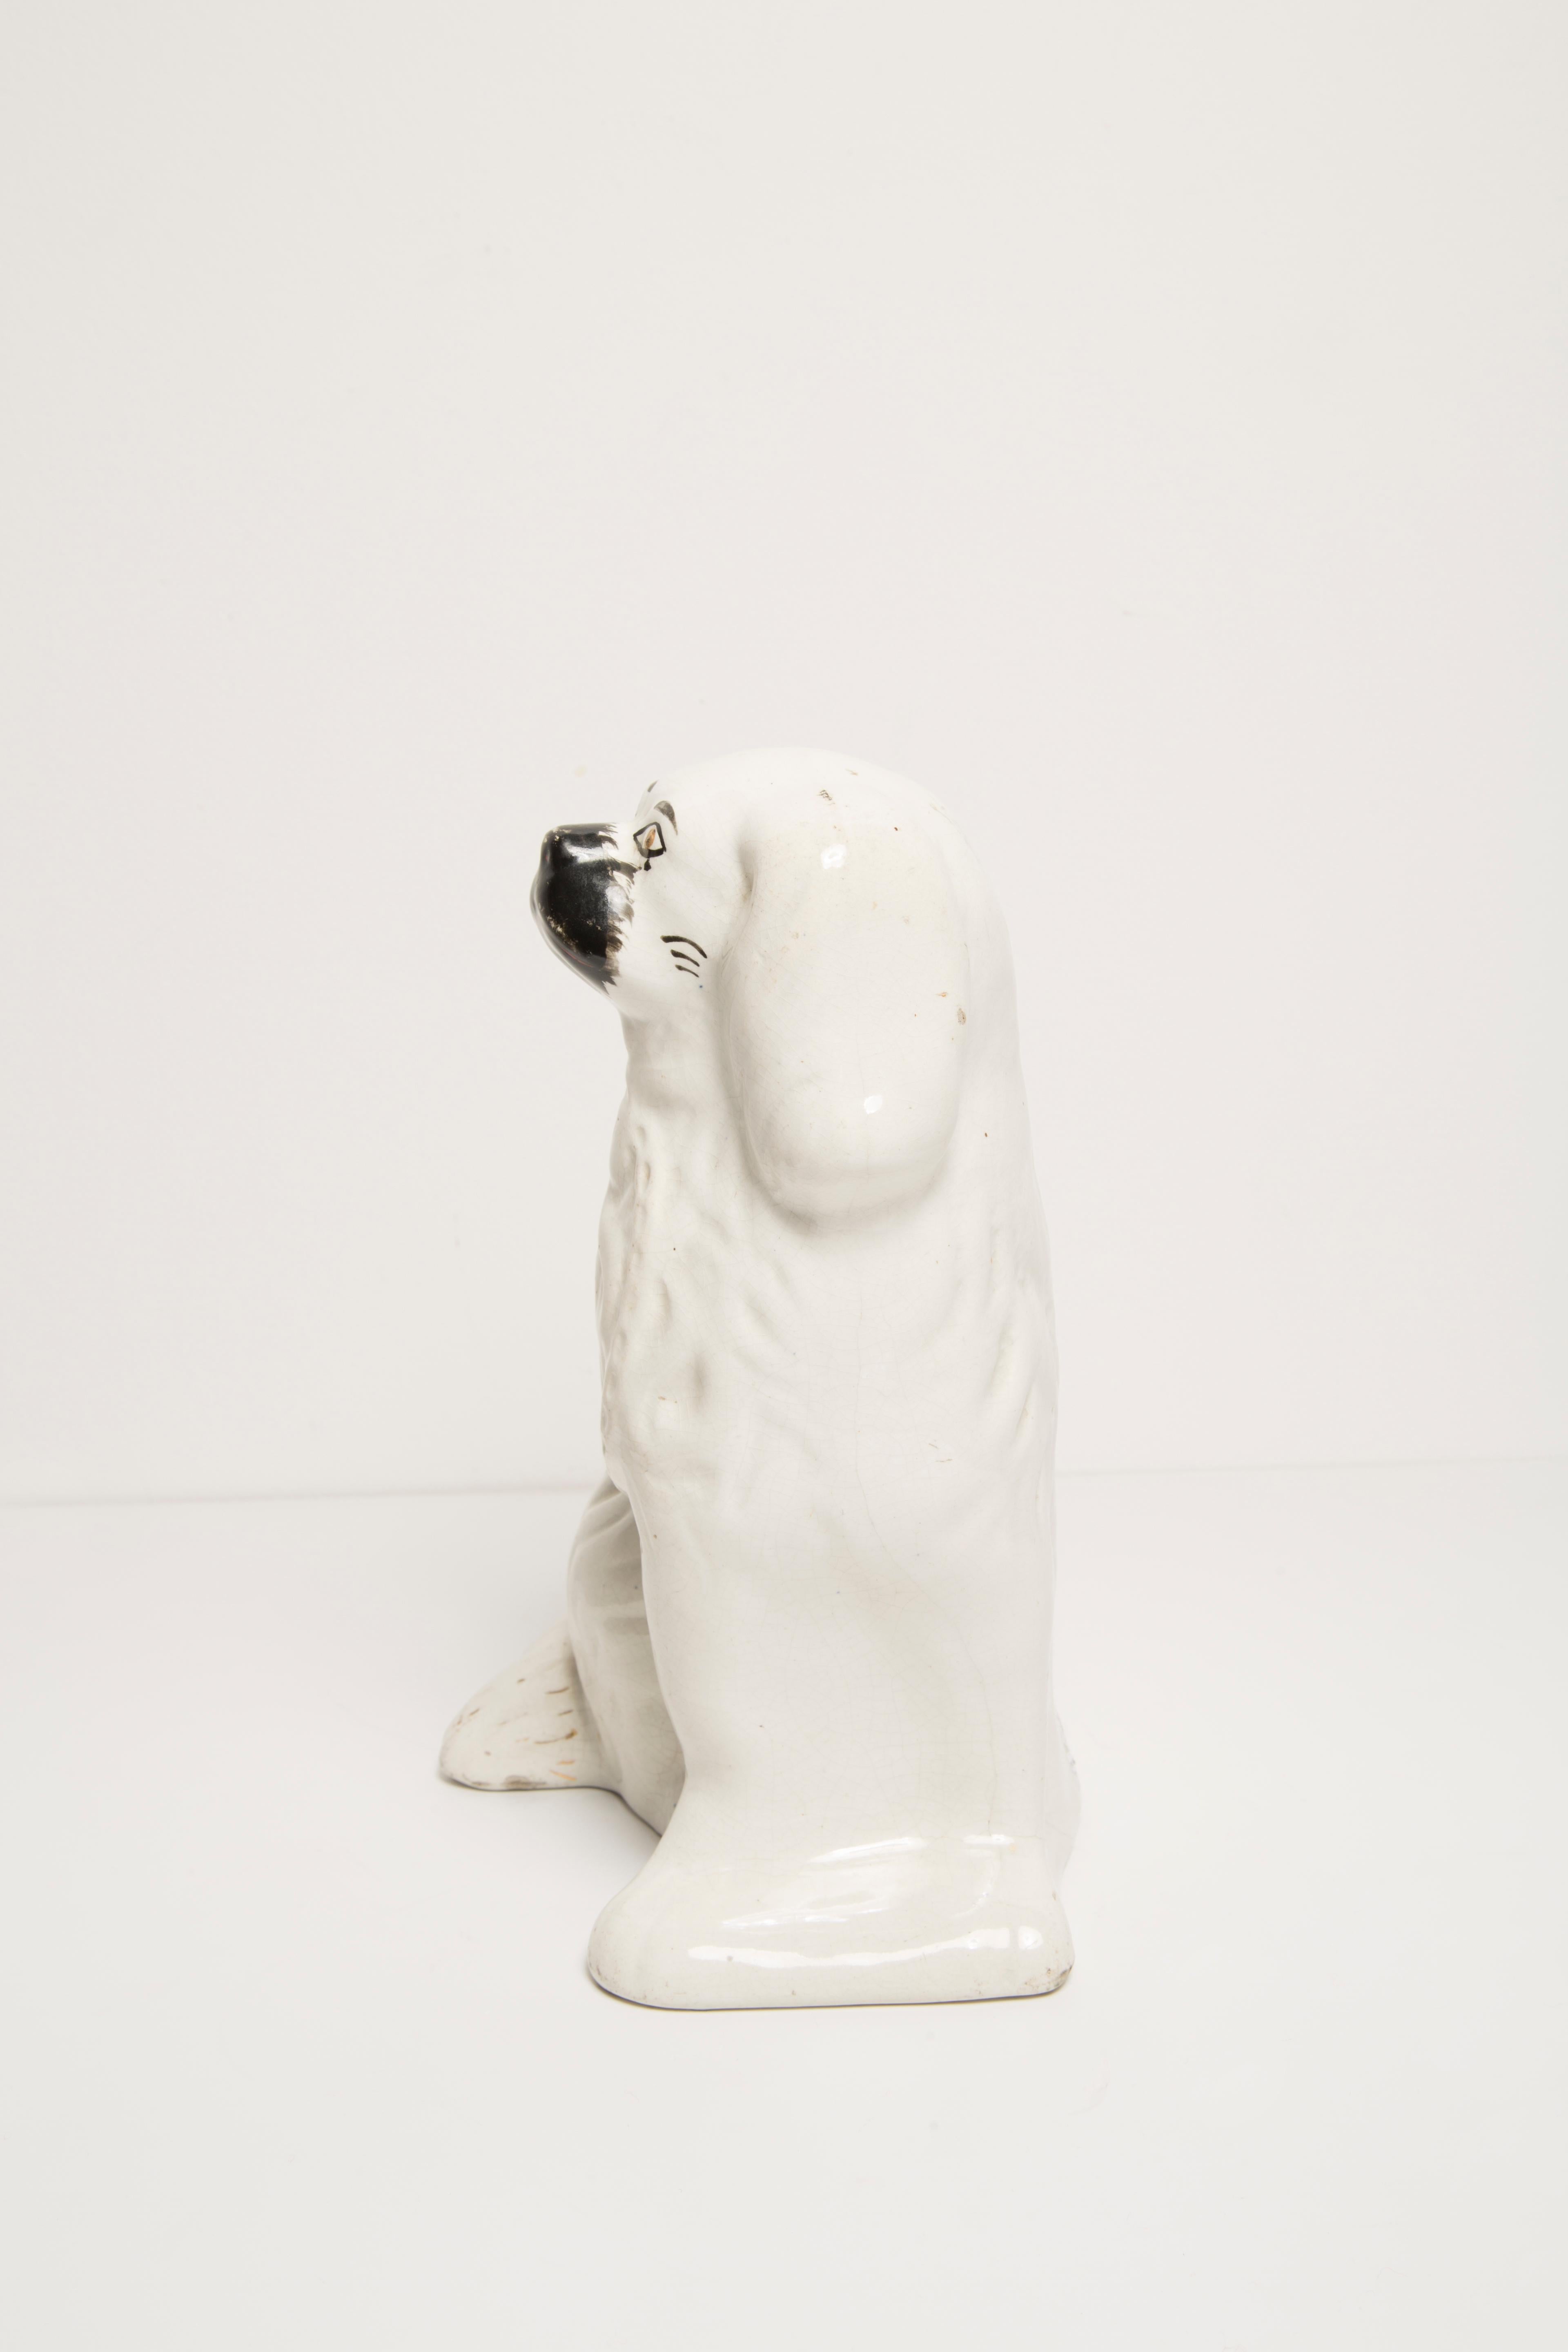 English Mid Century White Spaniel Dog Sculpture Staffordshire England, 1960s For Sale